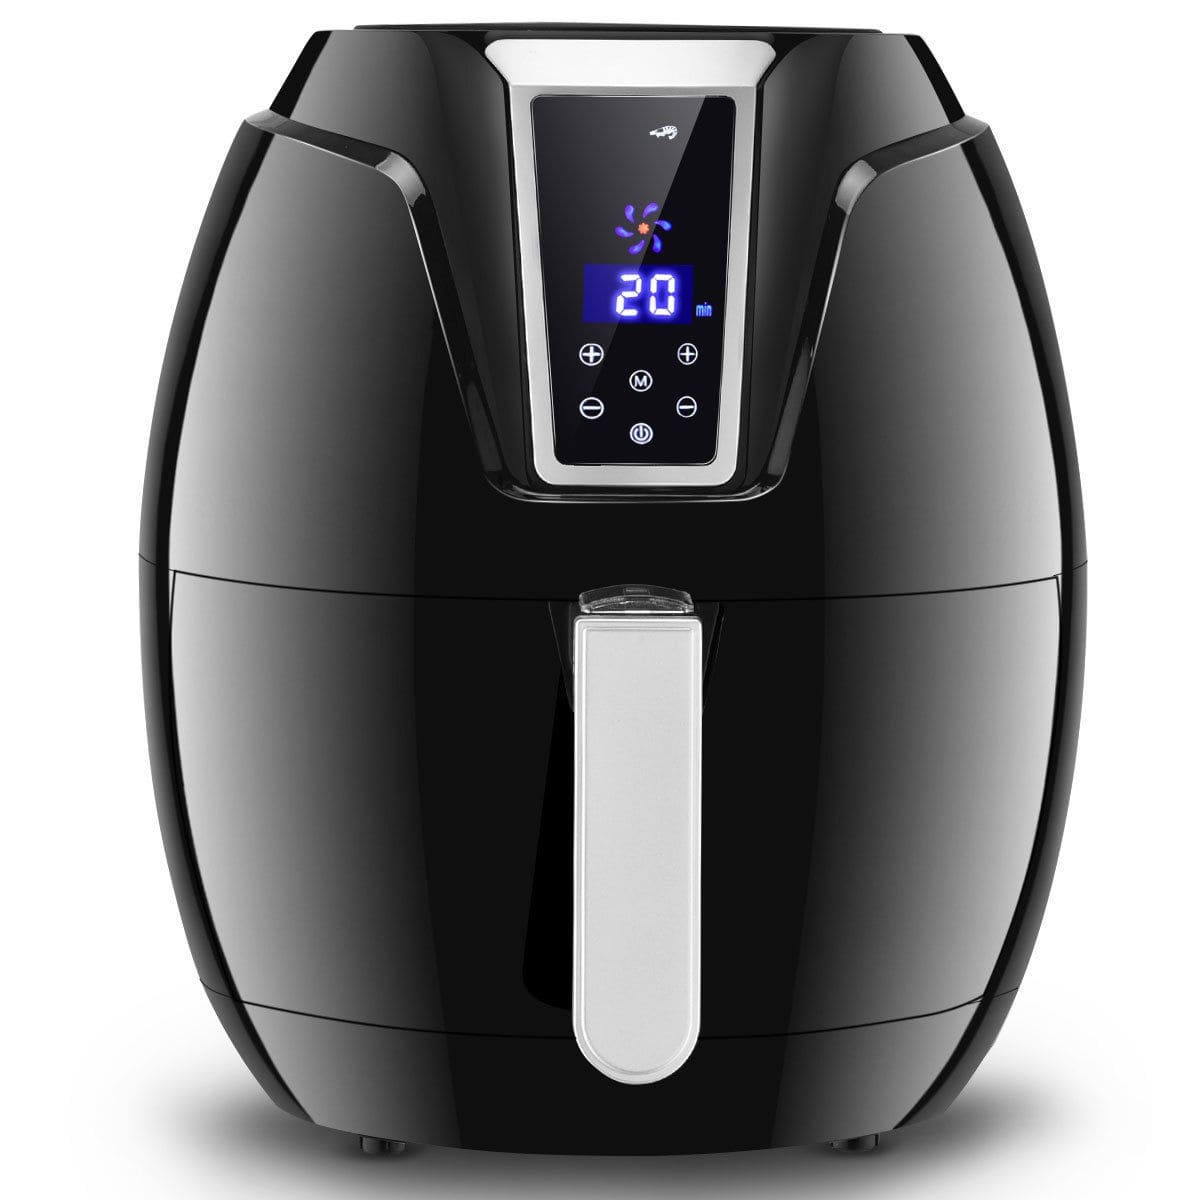 Gymax 7-in-1 Air Fryer 1400W 3.4Qt Oil Free Temperature&Time Control LCD Touch Screen - Black